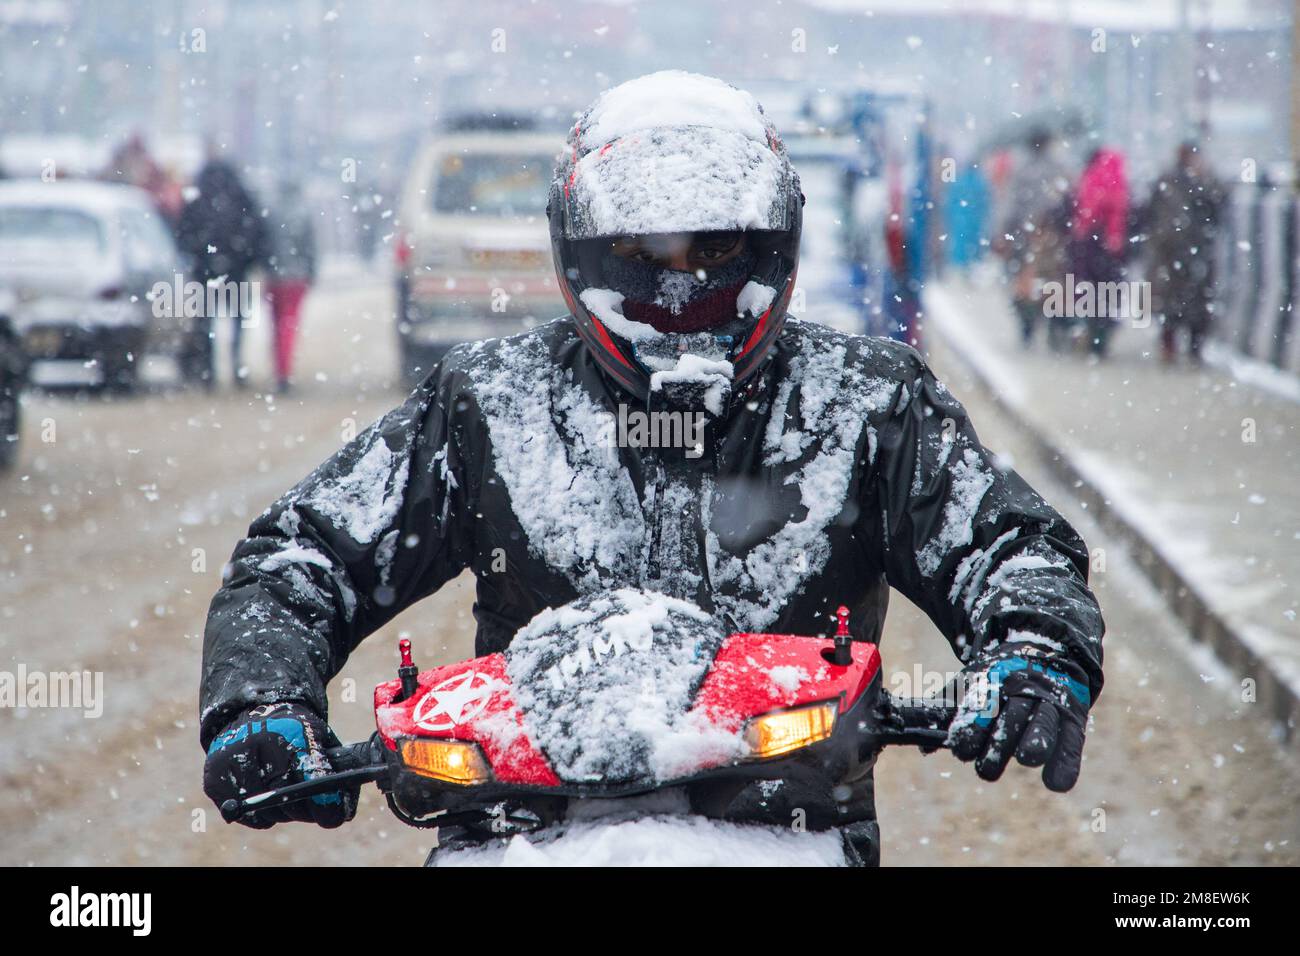 A scooty rider rides through a street amid ongoing heavy snowfall on the outskirts of Srinagar. At least two labourers killed on Thursday after an avalanche hits high-altitude area in central Kashmir's Sonamarg. Most parts of Kashmir received fresh snowfall that leading to the closure of Kashmir capital's main highway that connects disputed region with the rest of India. Meanwhile airport authorities suspended all flight operations till further notice due to continuous snowfall and low visibility. (Photo by Faisal Bashir/SOPA Images/Sipa USA) Stock Photo